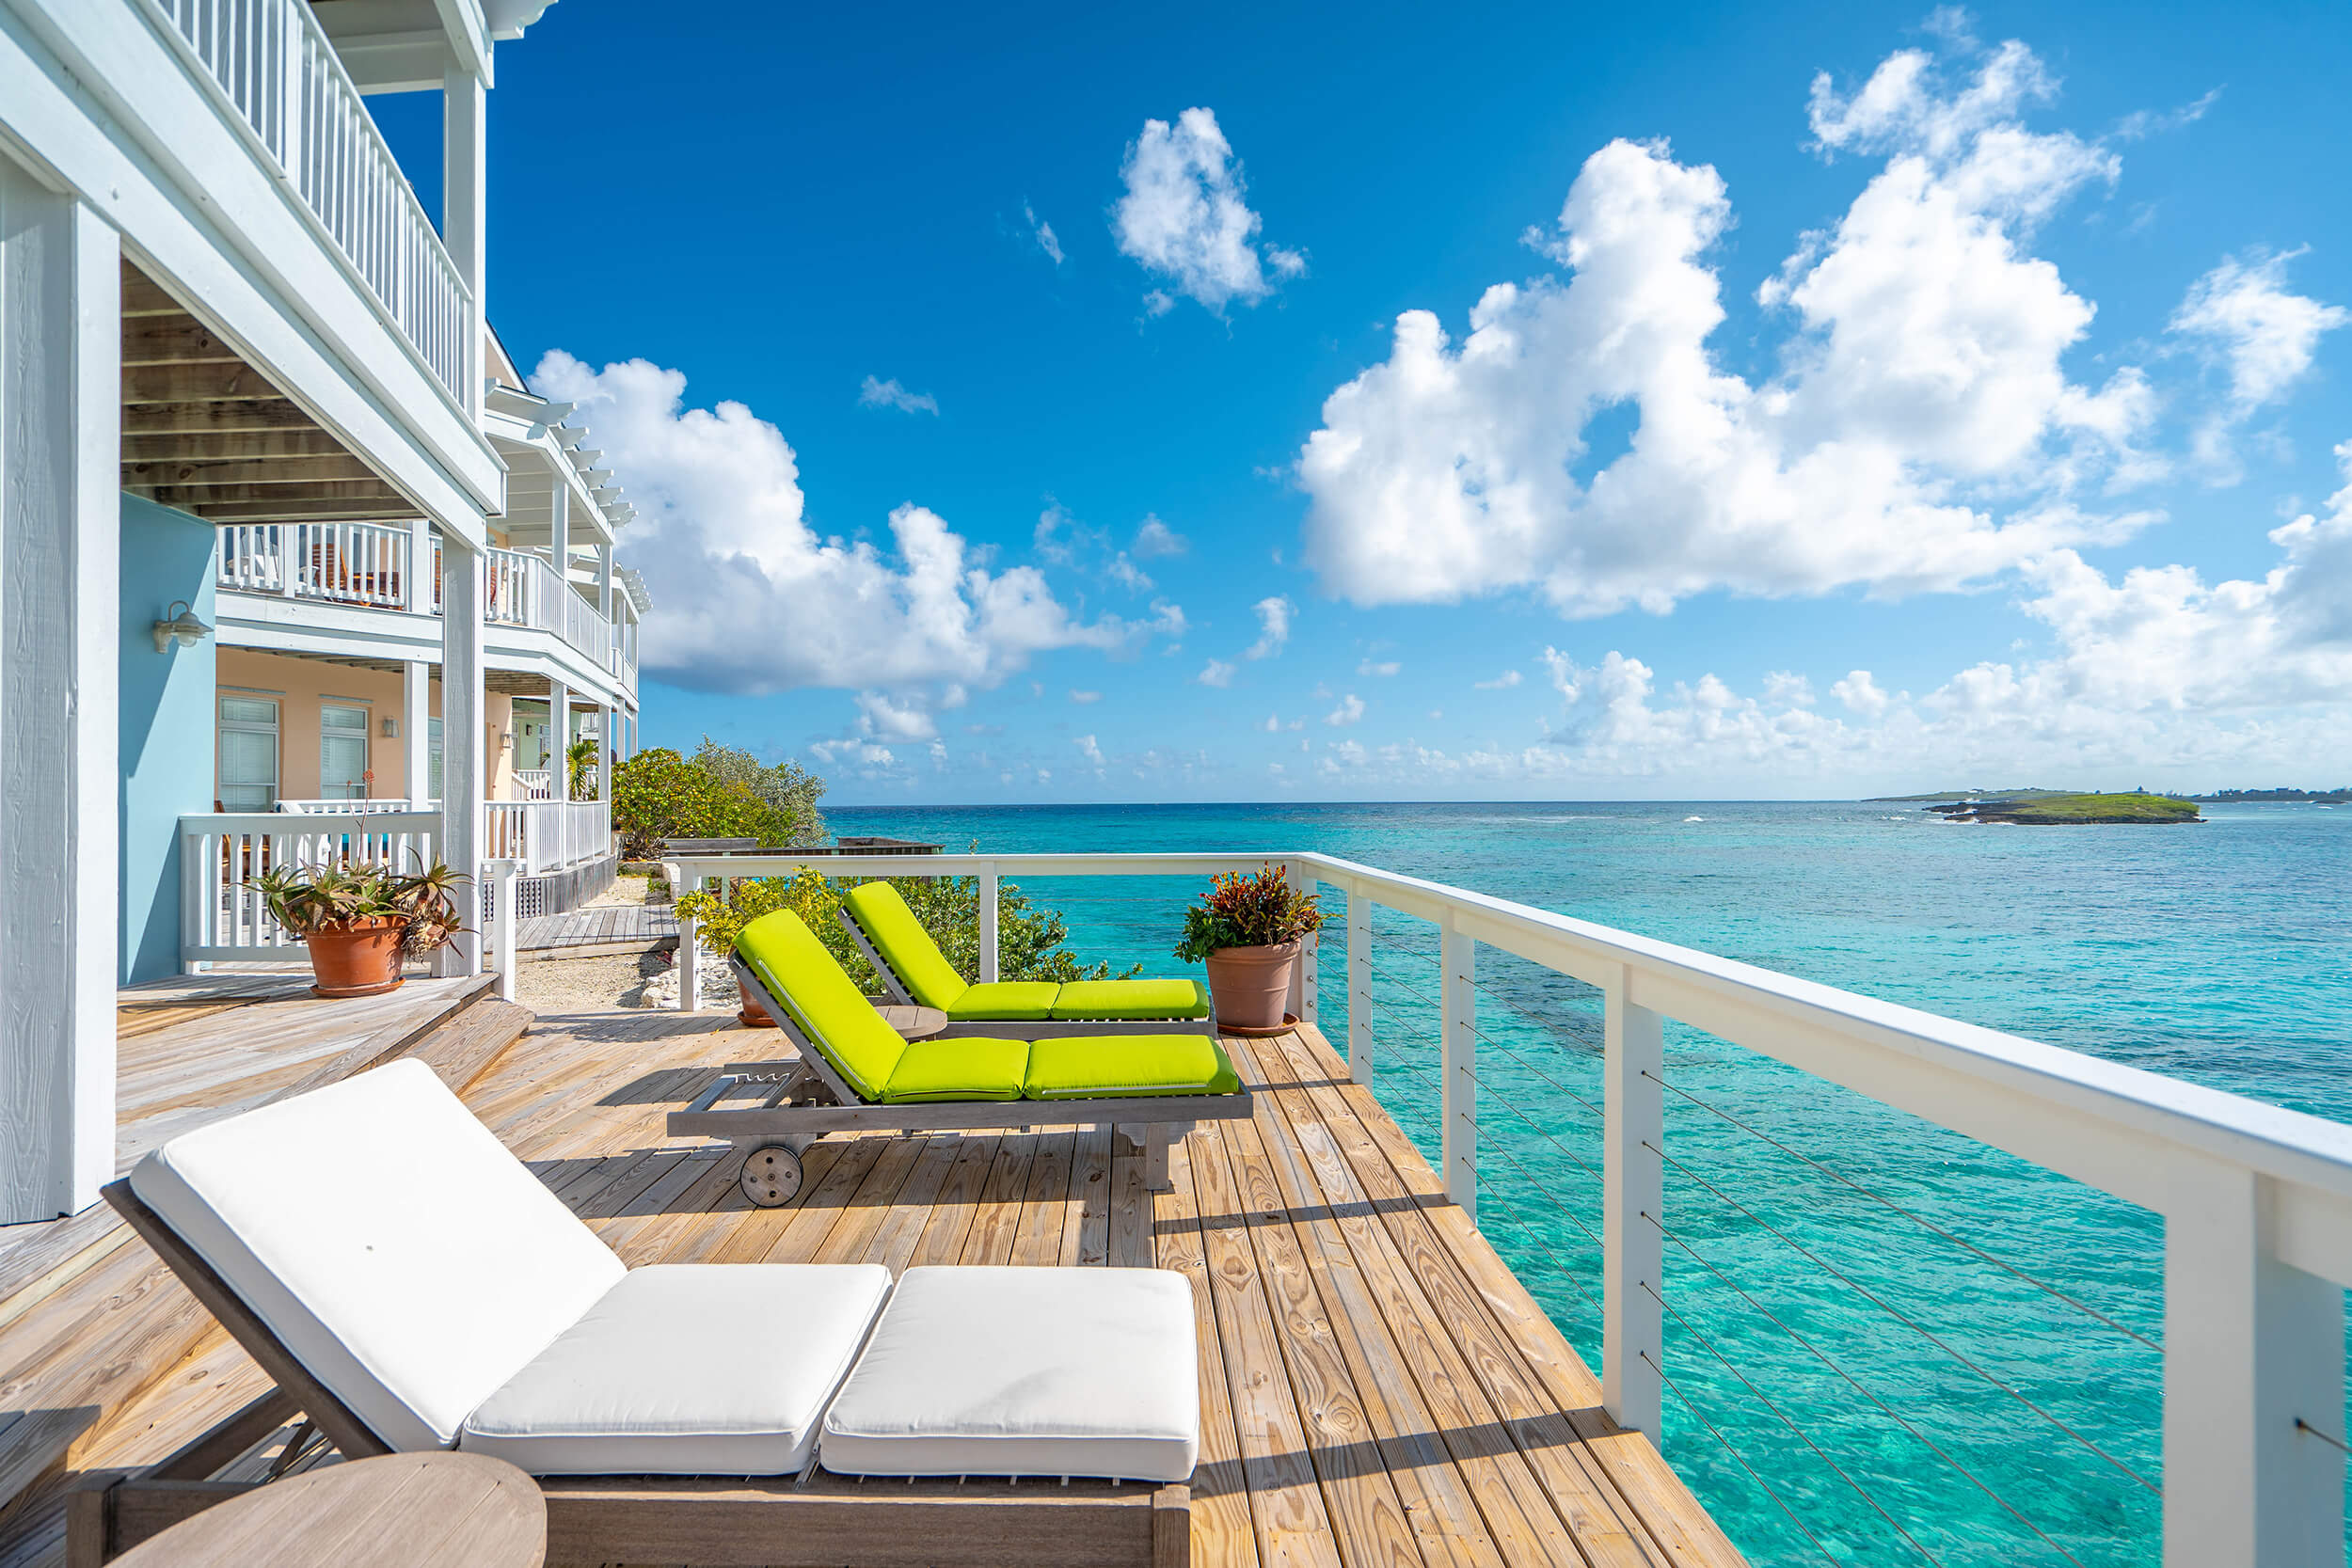 Balcony of a luxury beachfront property at The Abaco Club